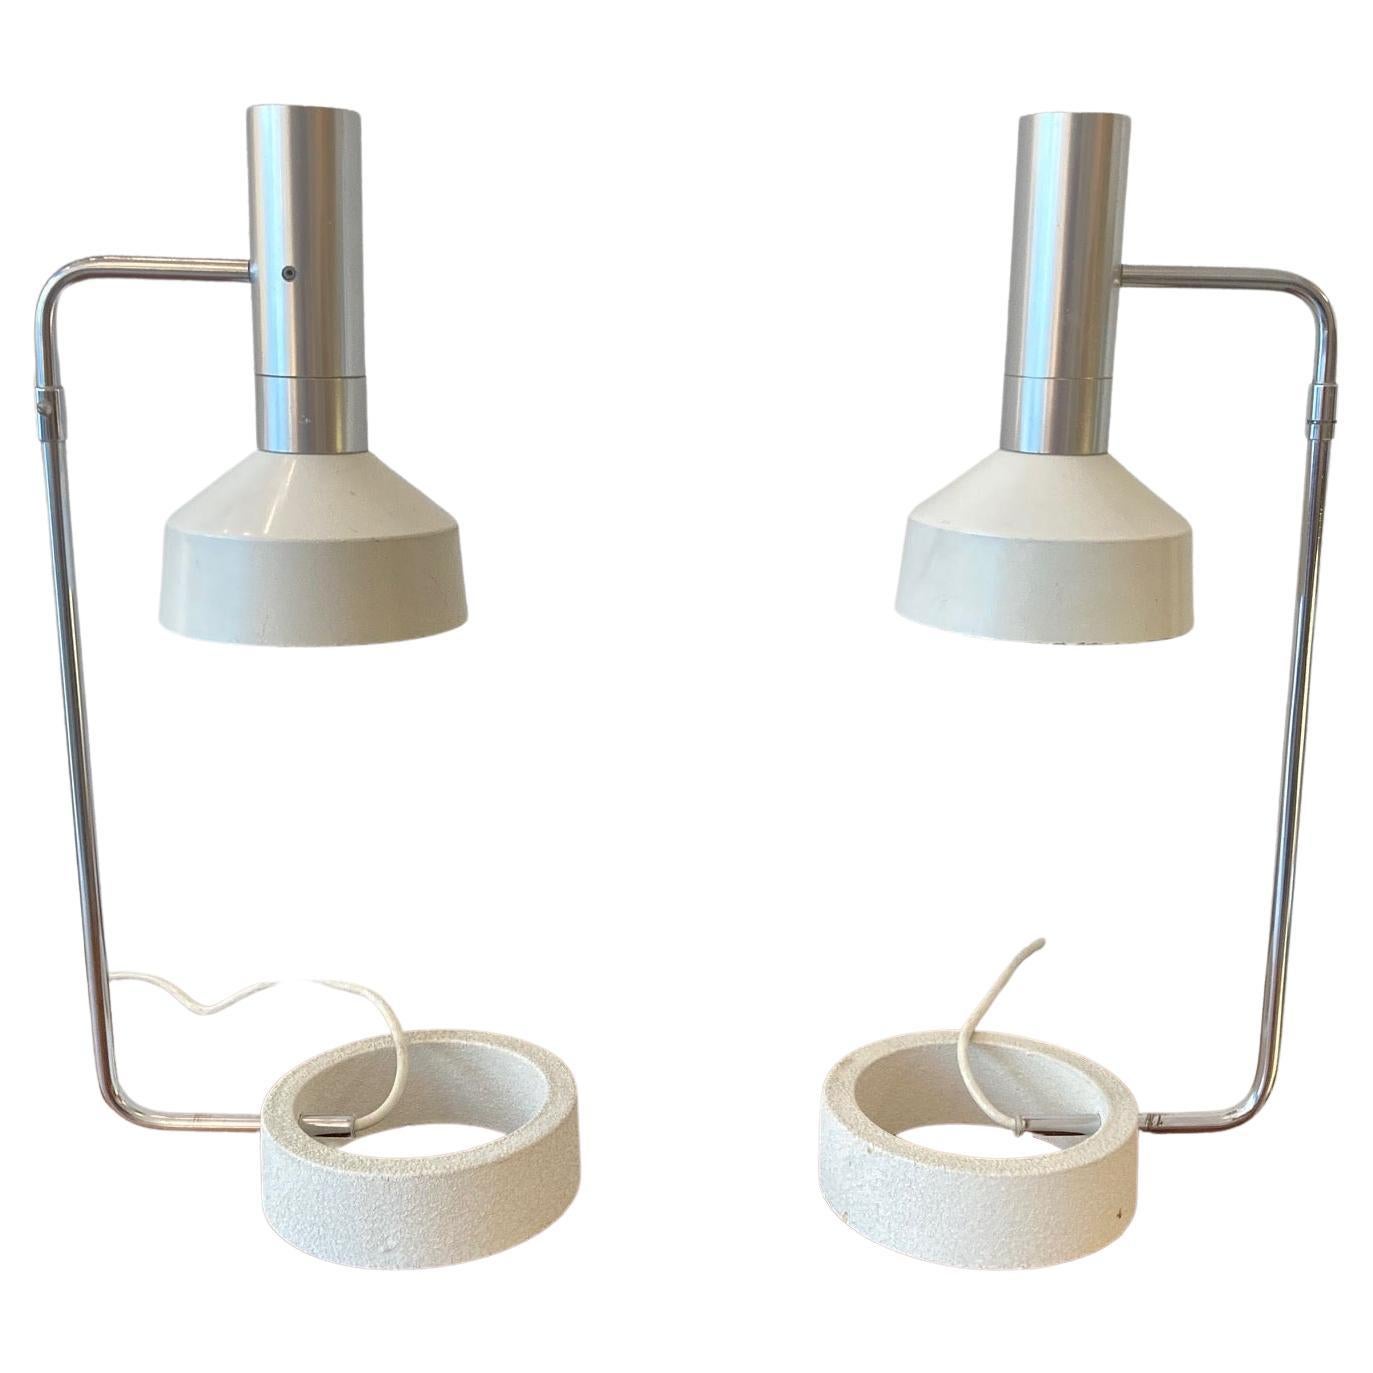 Pair of Articulated Minilux Table Lamp by Baltensweiler AG, Switzerland ca. 1960